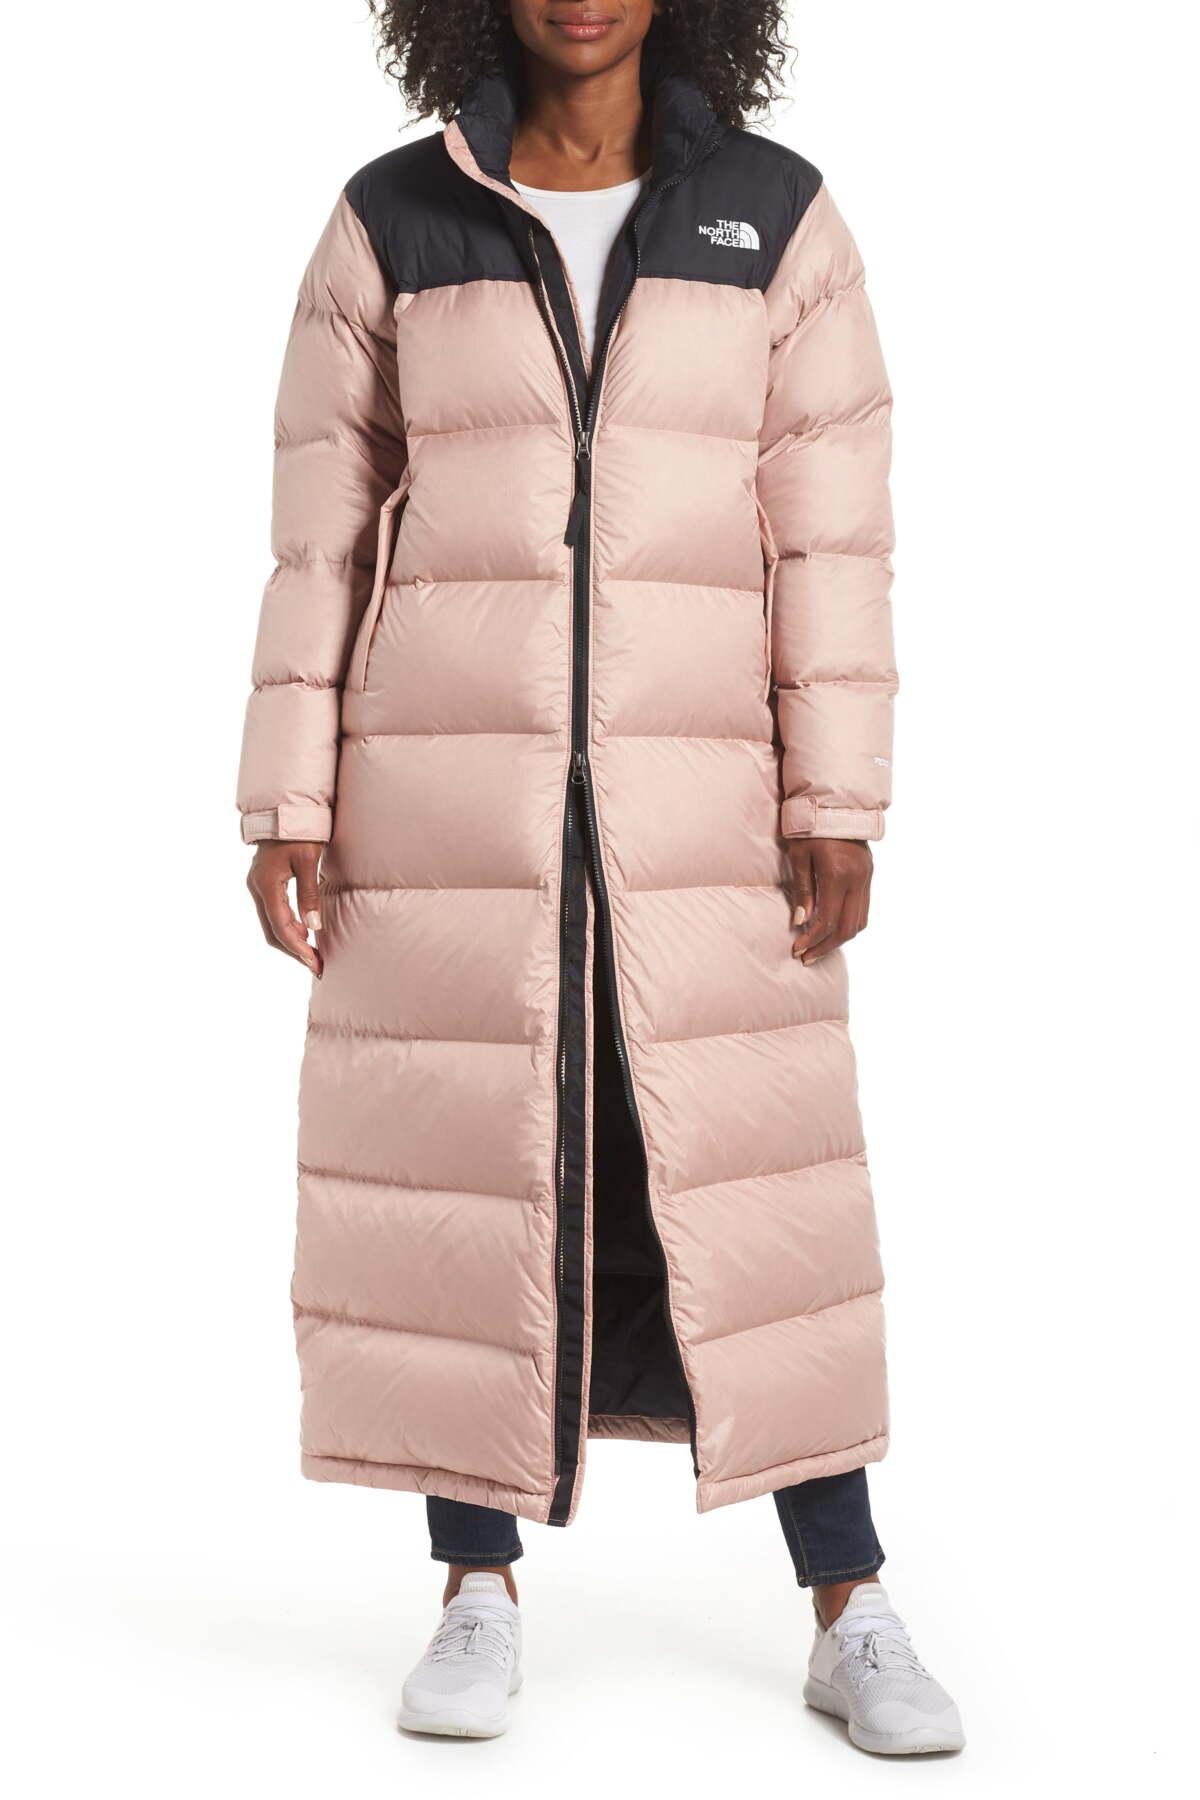 The North Face Goose Nuptse Long Duster Puffer Coat W/ Packable Hood in  Pink - Lyst